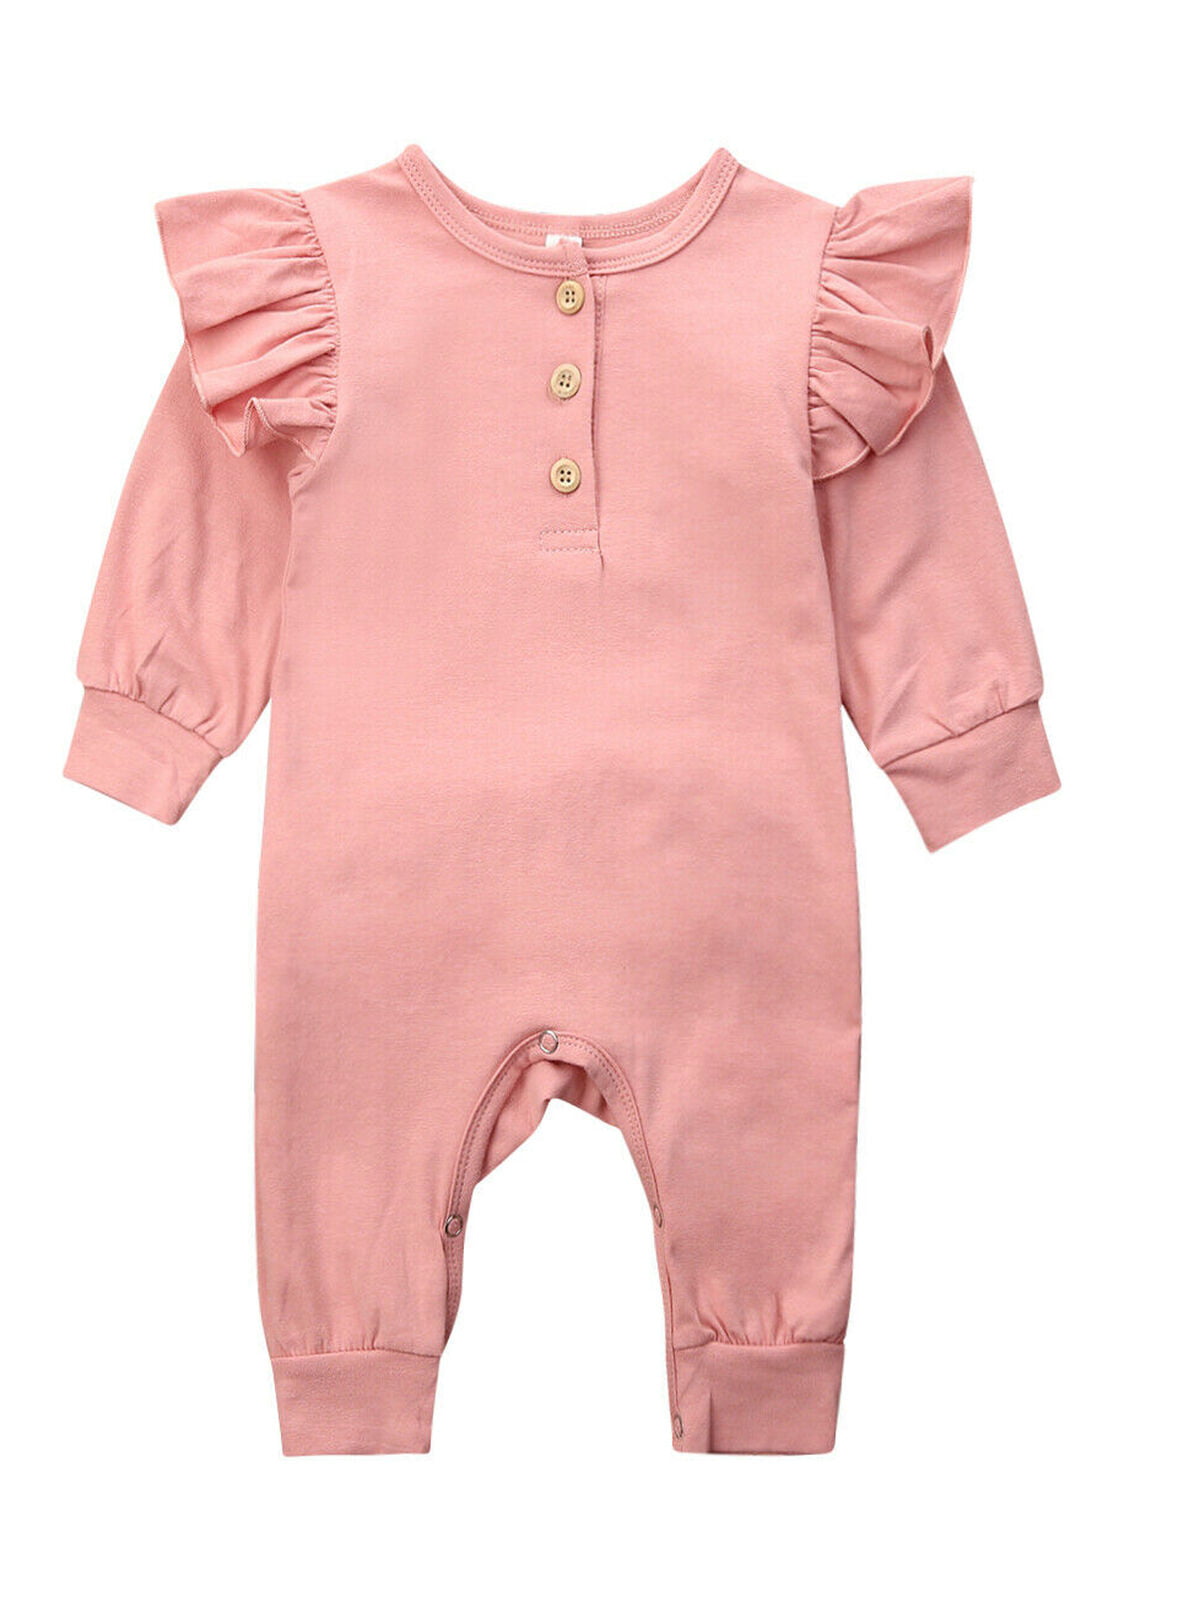 Newborn Infant Baby Girls Long Sleeve Romper Jumpsuit One-piece Outfits Clothes 